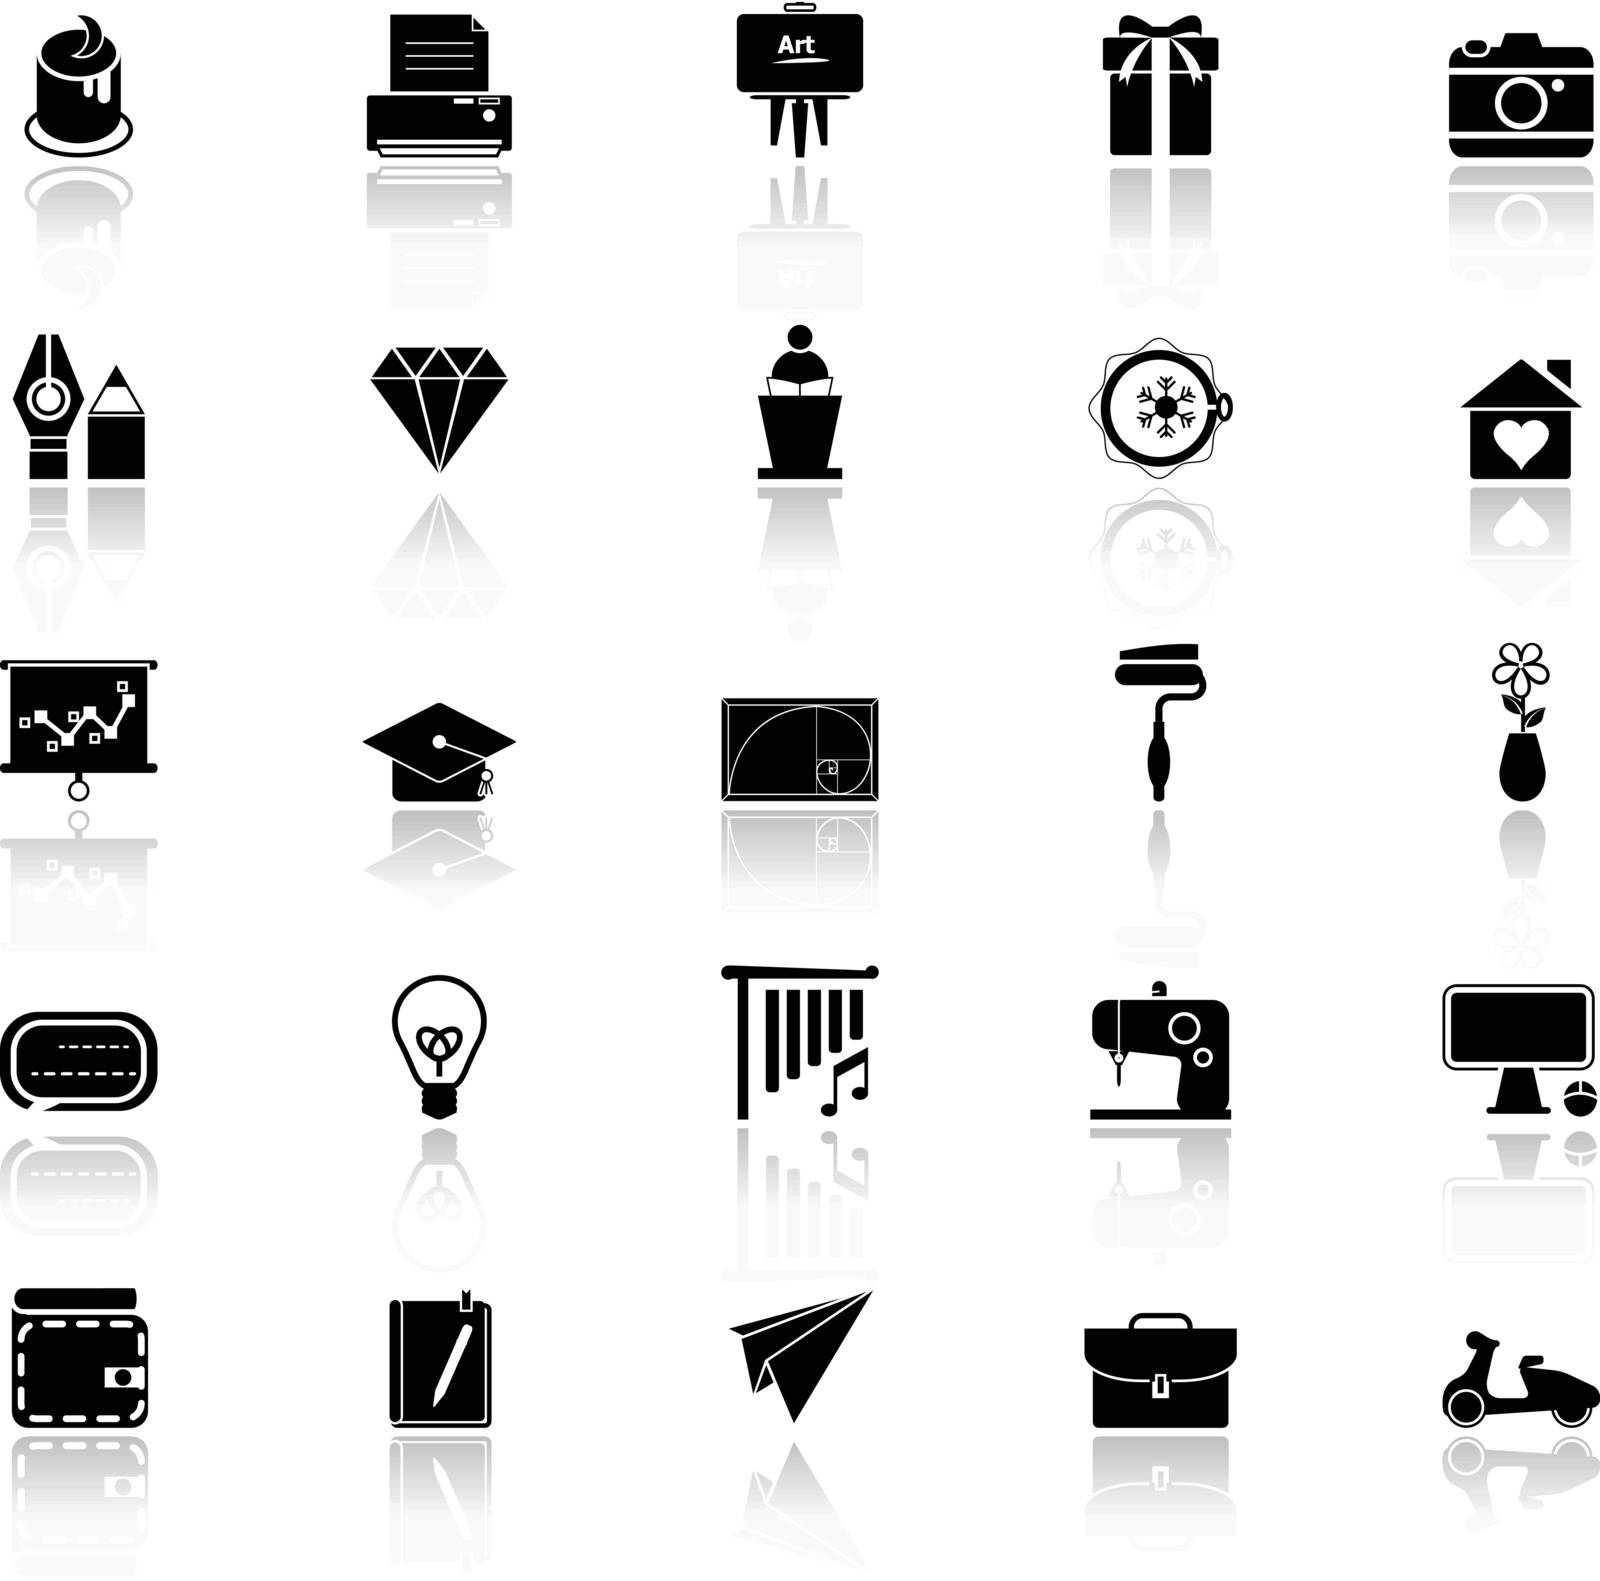 Art and creation icons with reflect on white background, stock vector